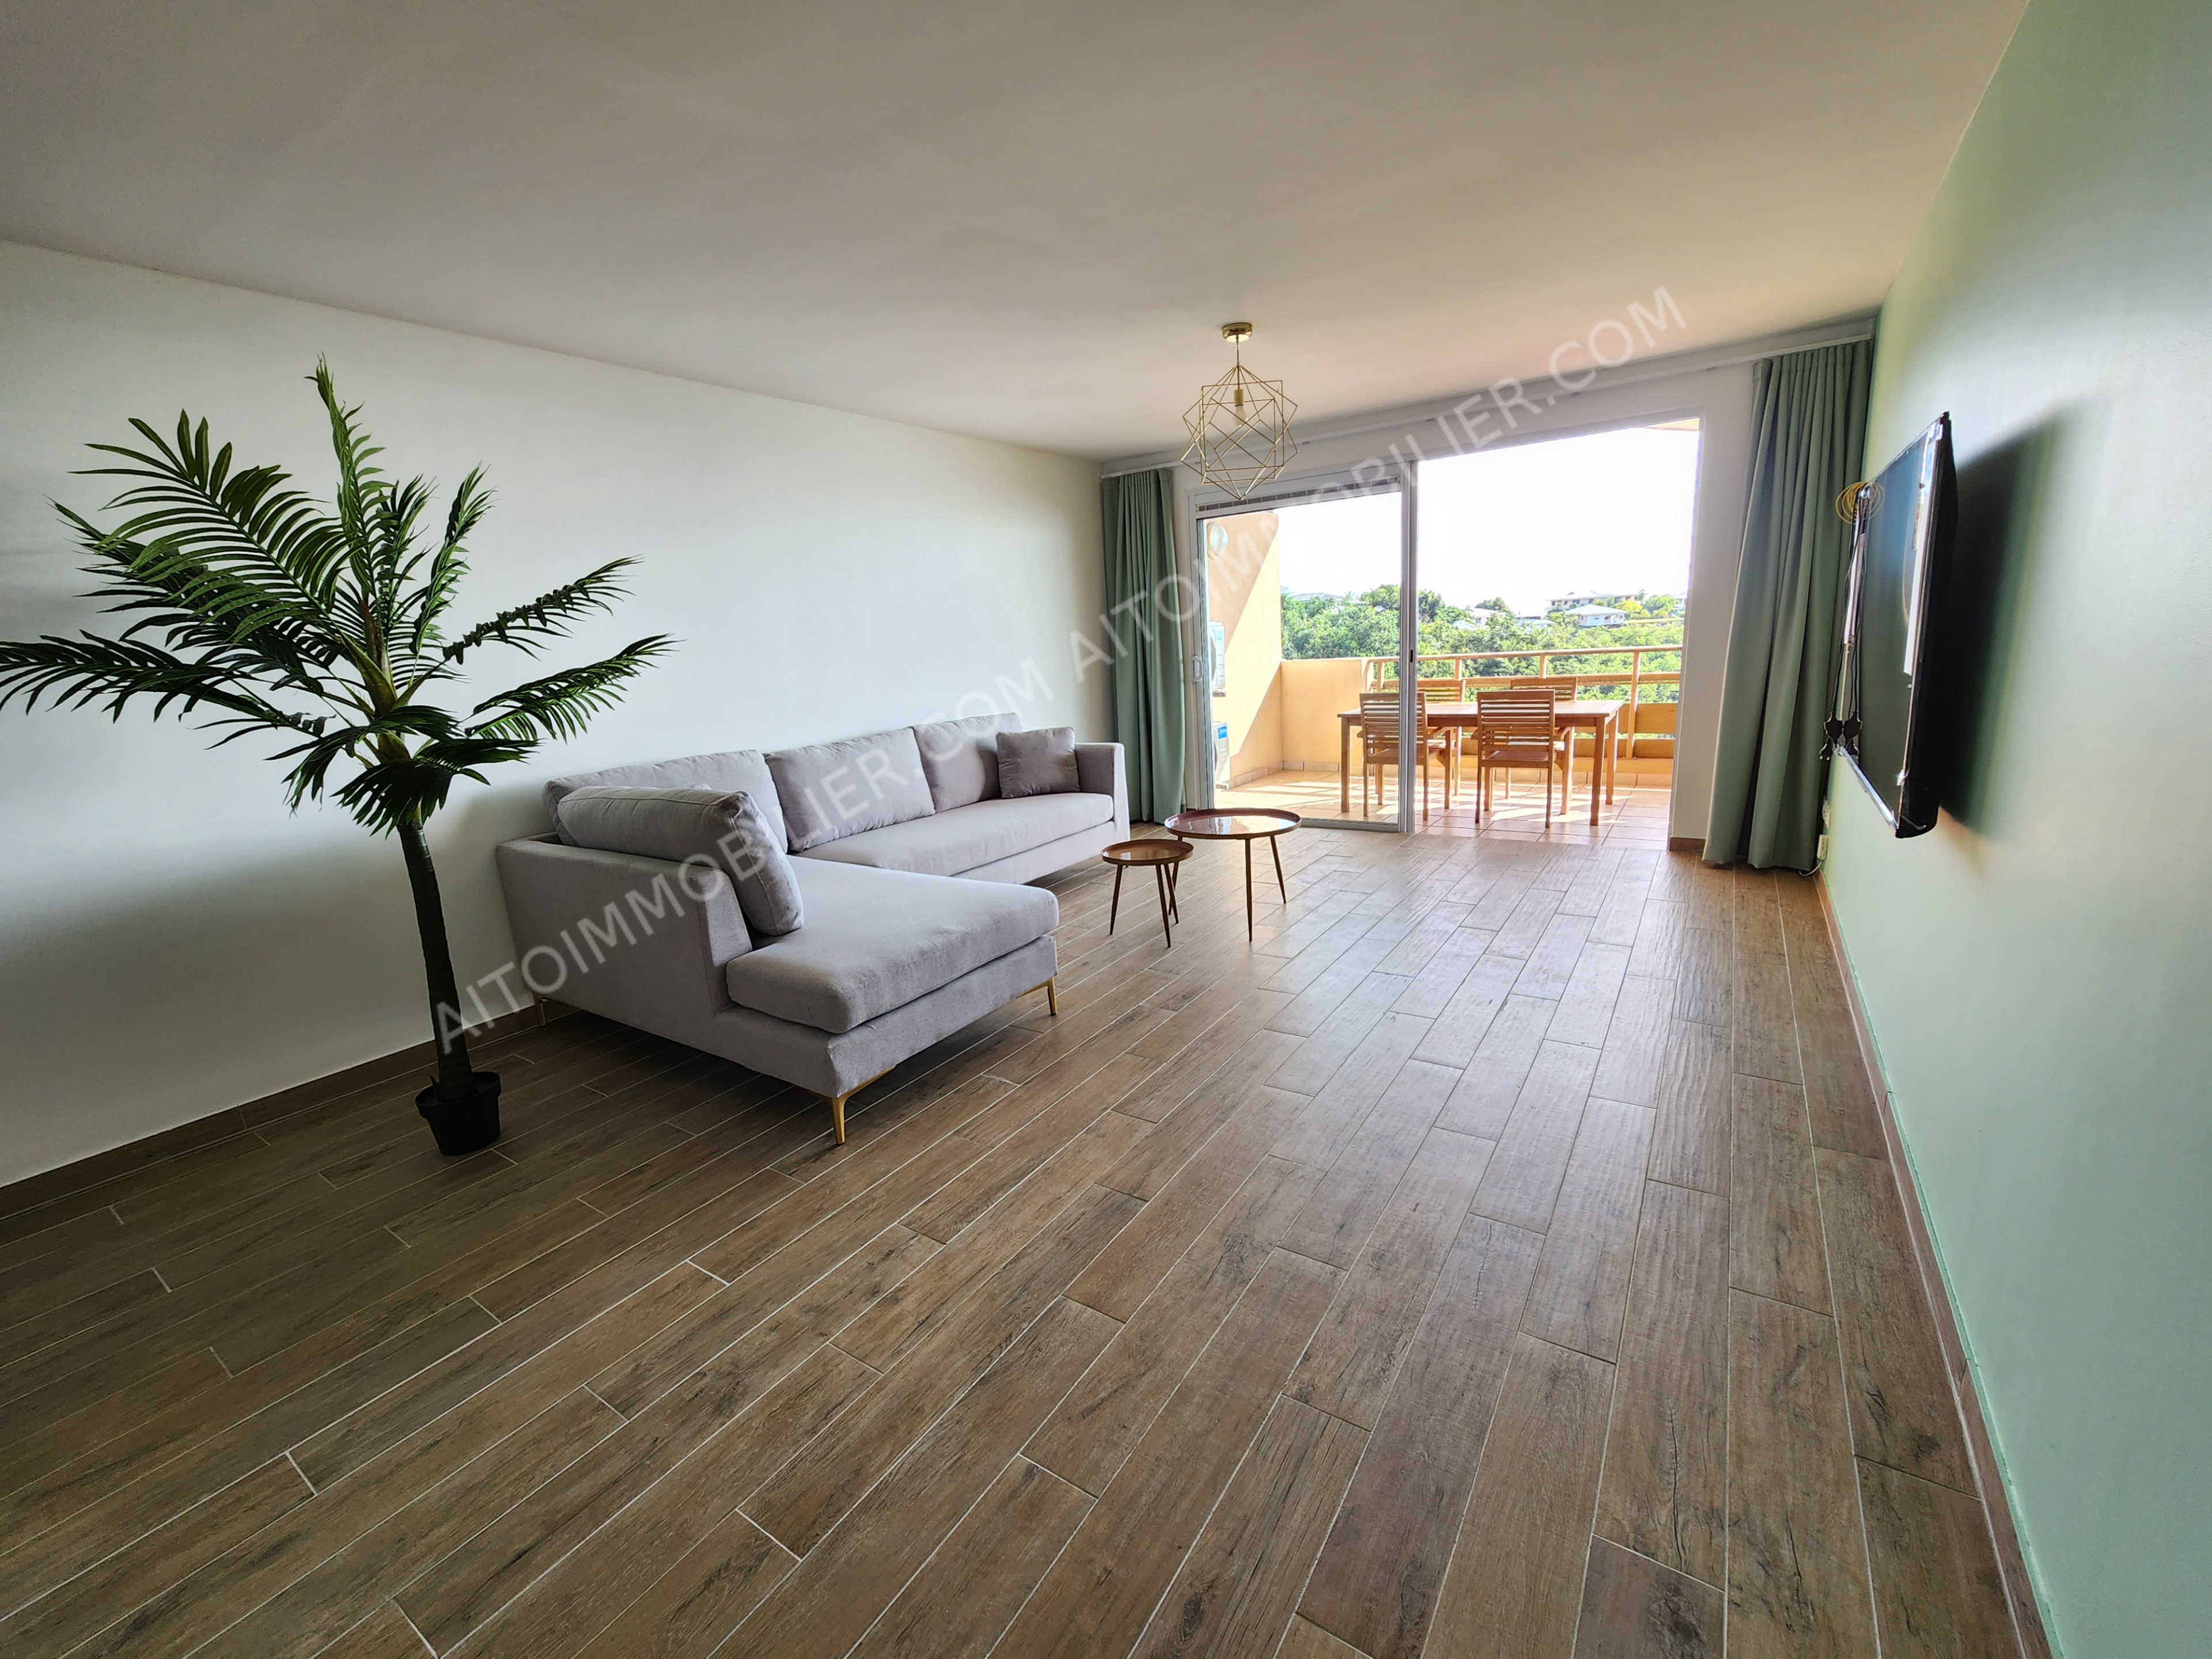 LOCATION PUNAAUIA APPARTEMENT F3 2